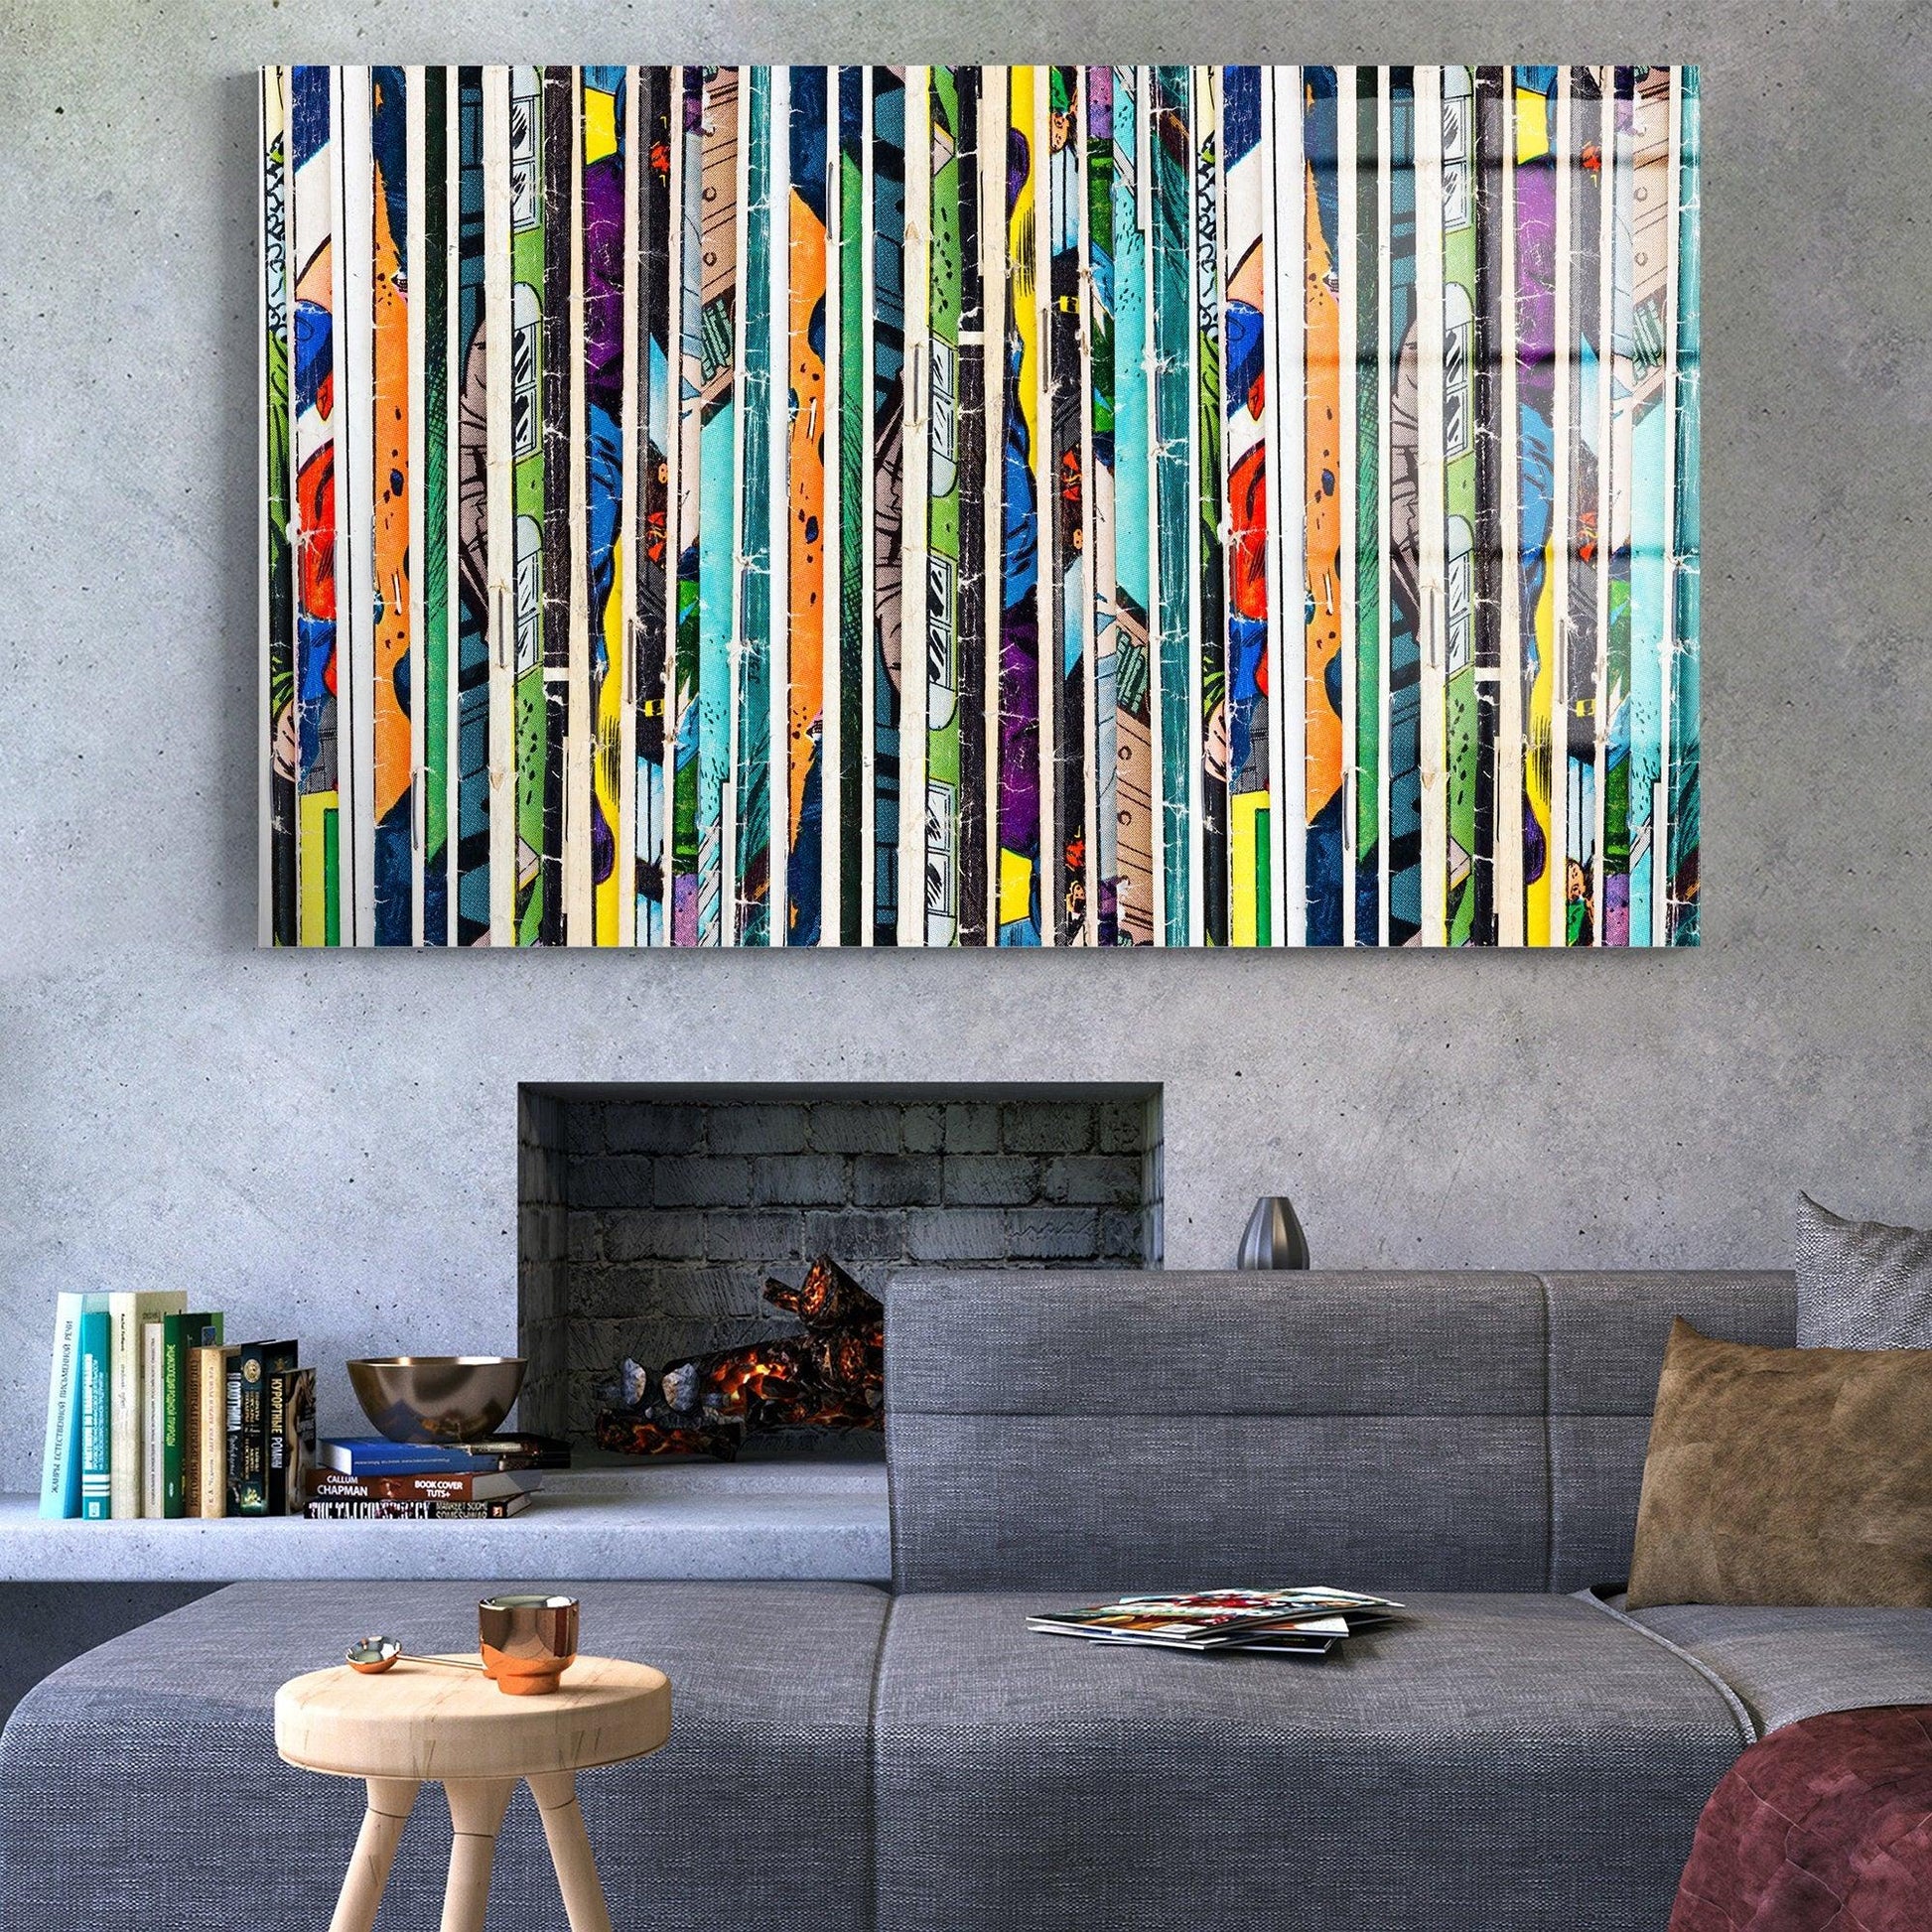 Abstraction glass printing wall decor Colorful deco, Comic book vintage, graffiti tempered glass wall art, office decor for wall, canvas art